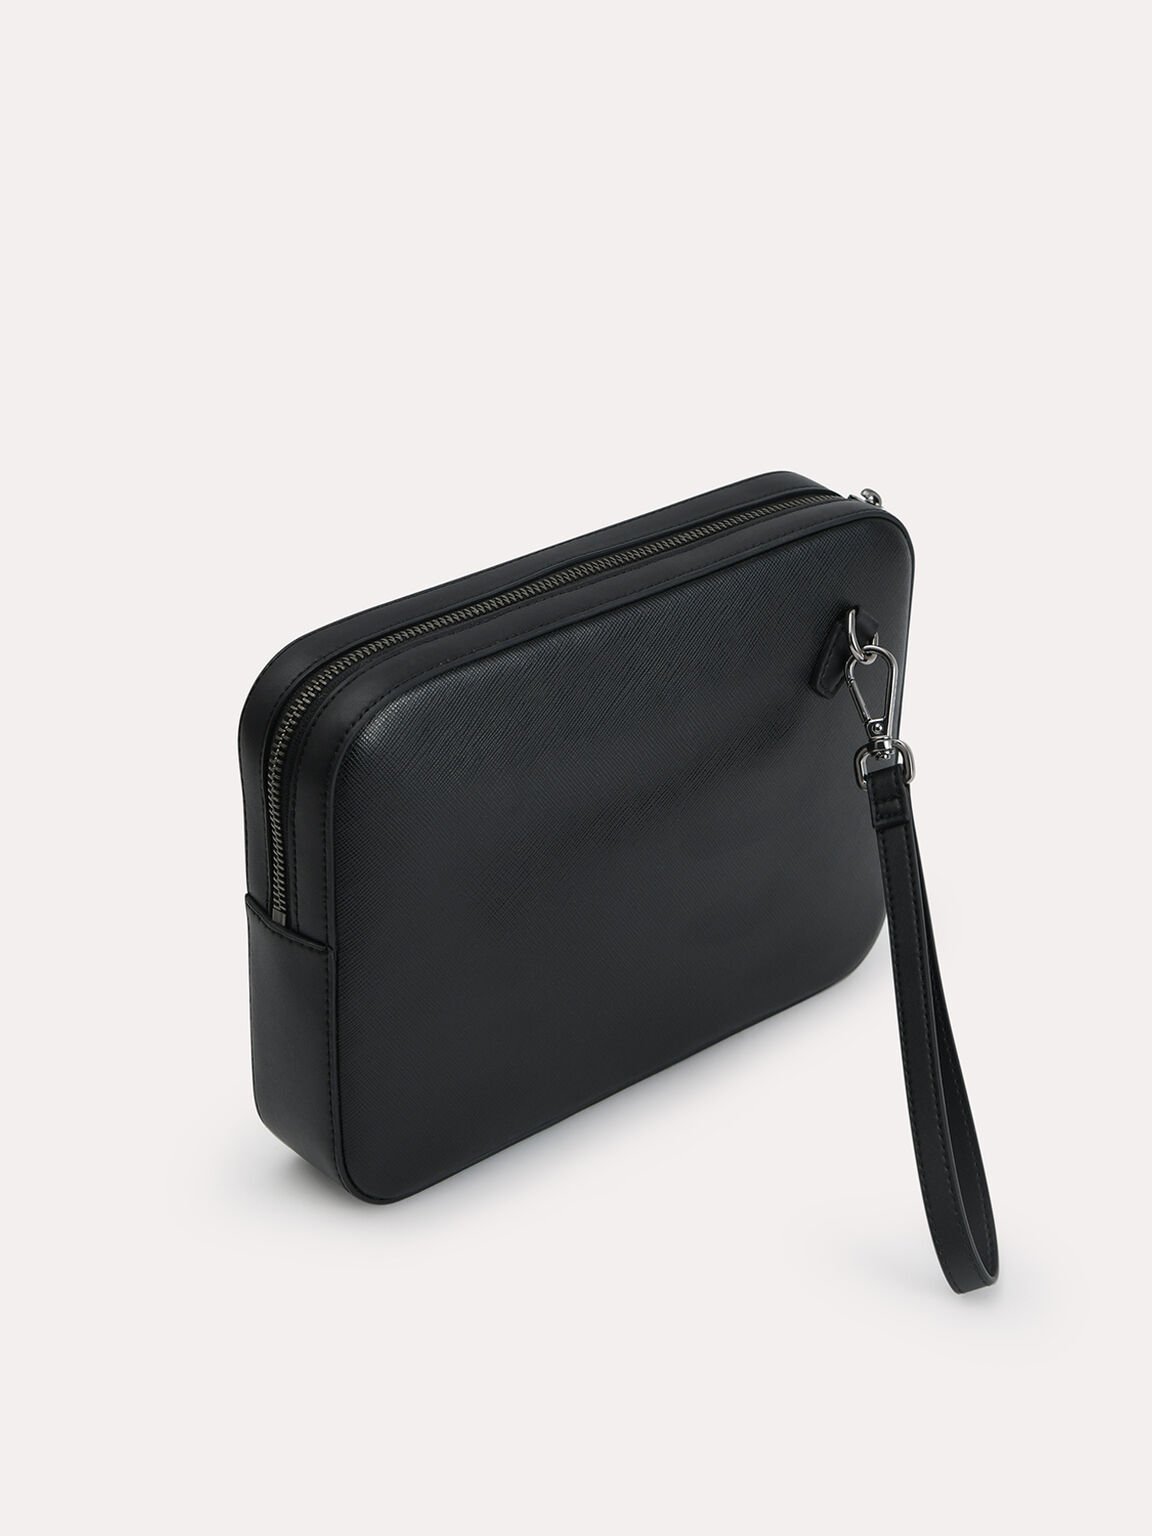 Textured Leather Clutch with Wristlet, Black